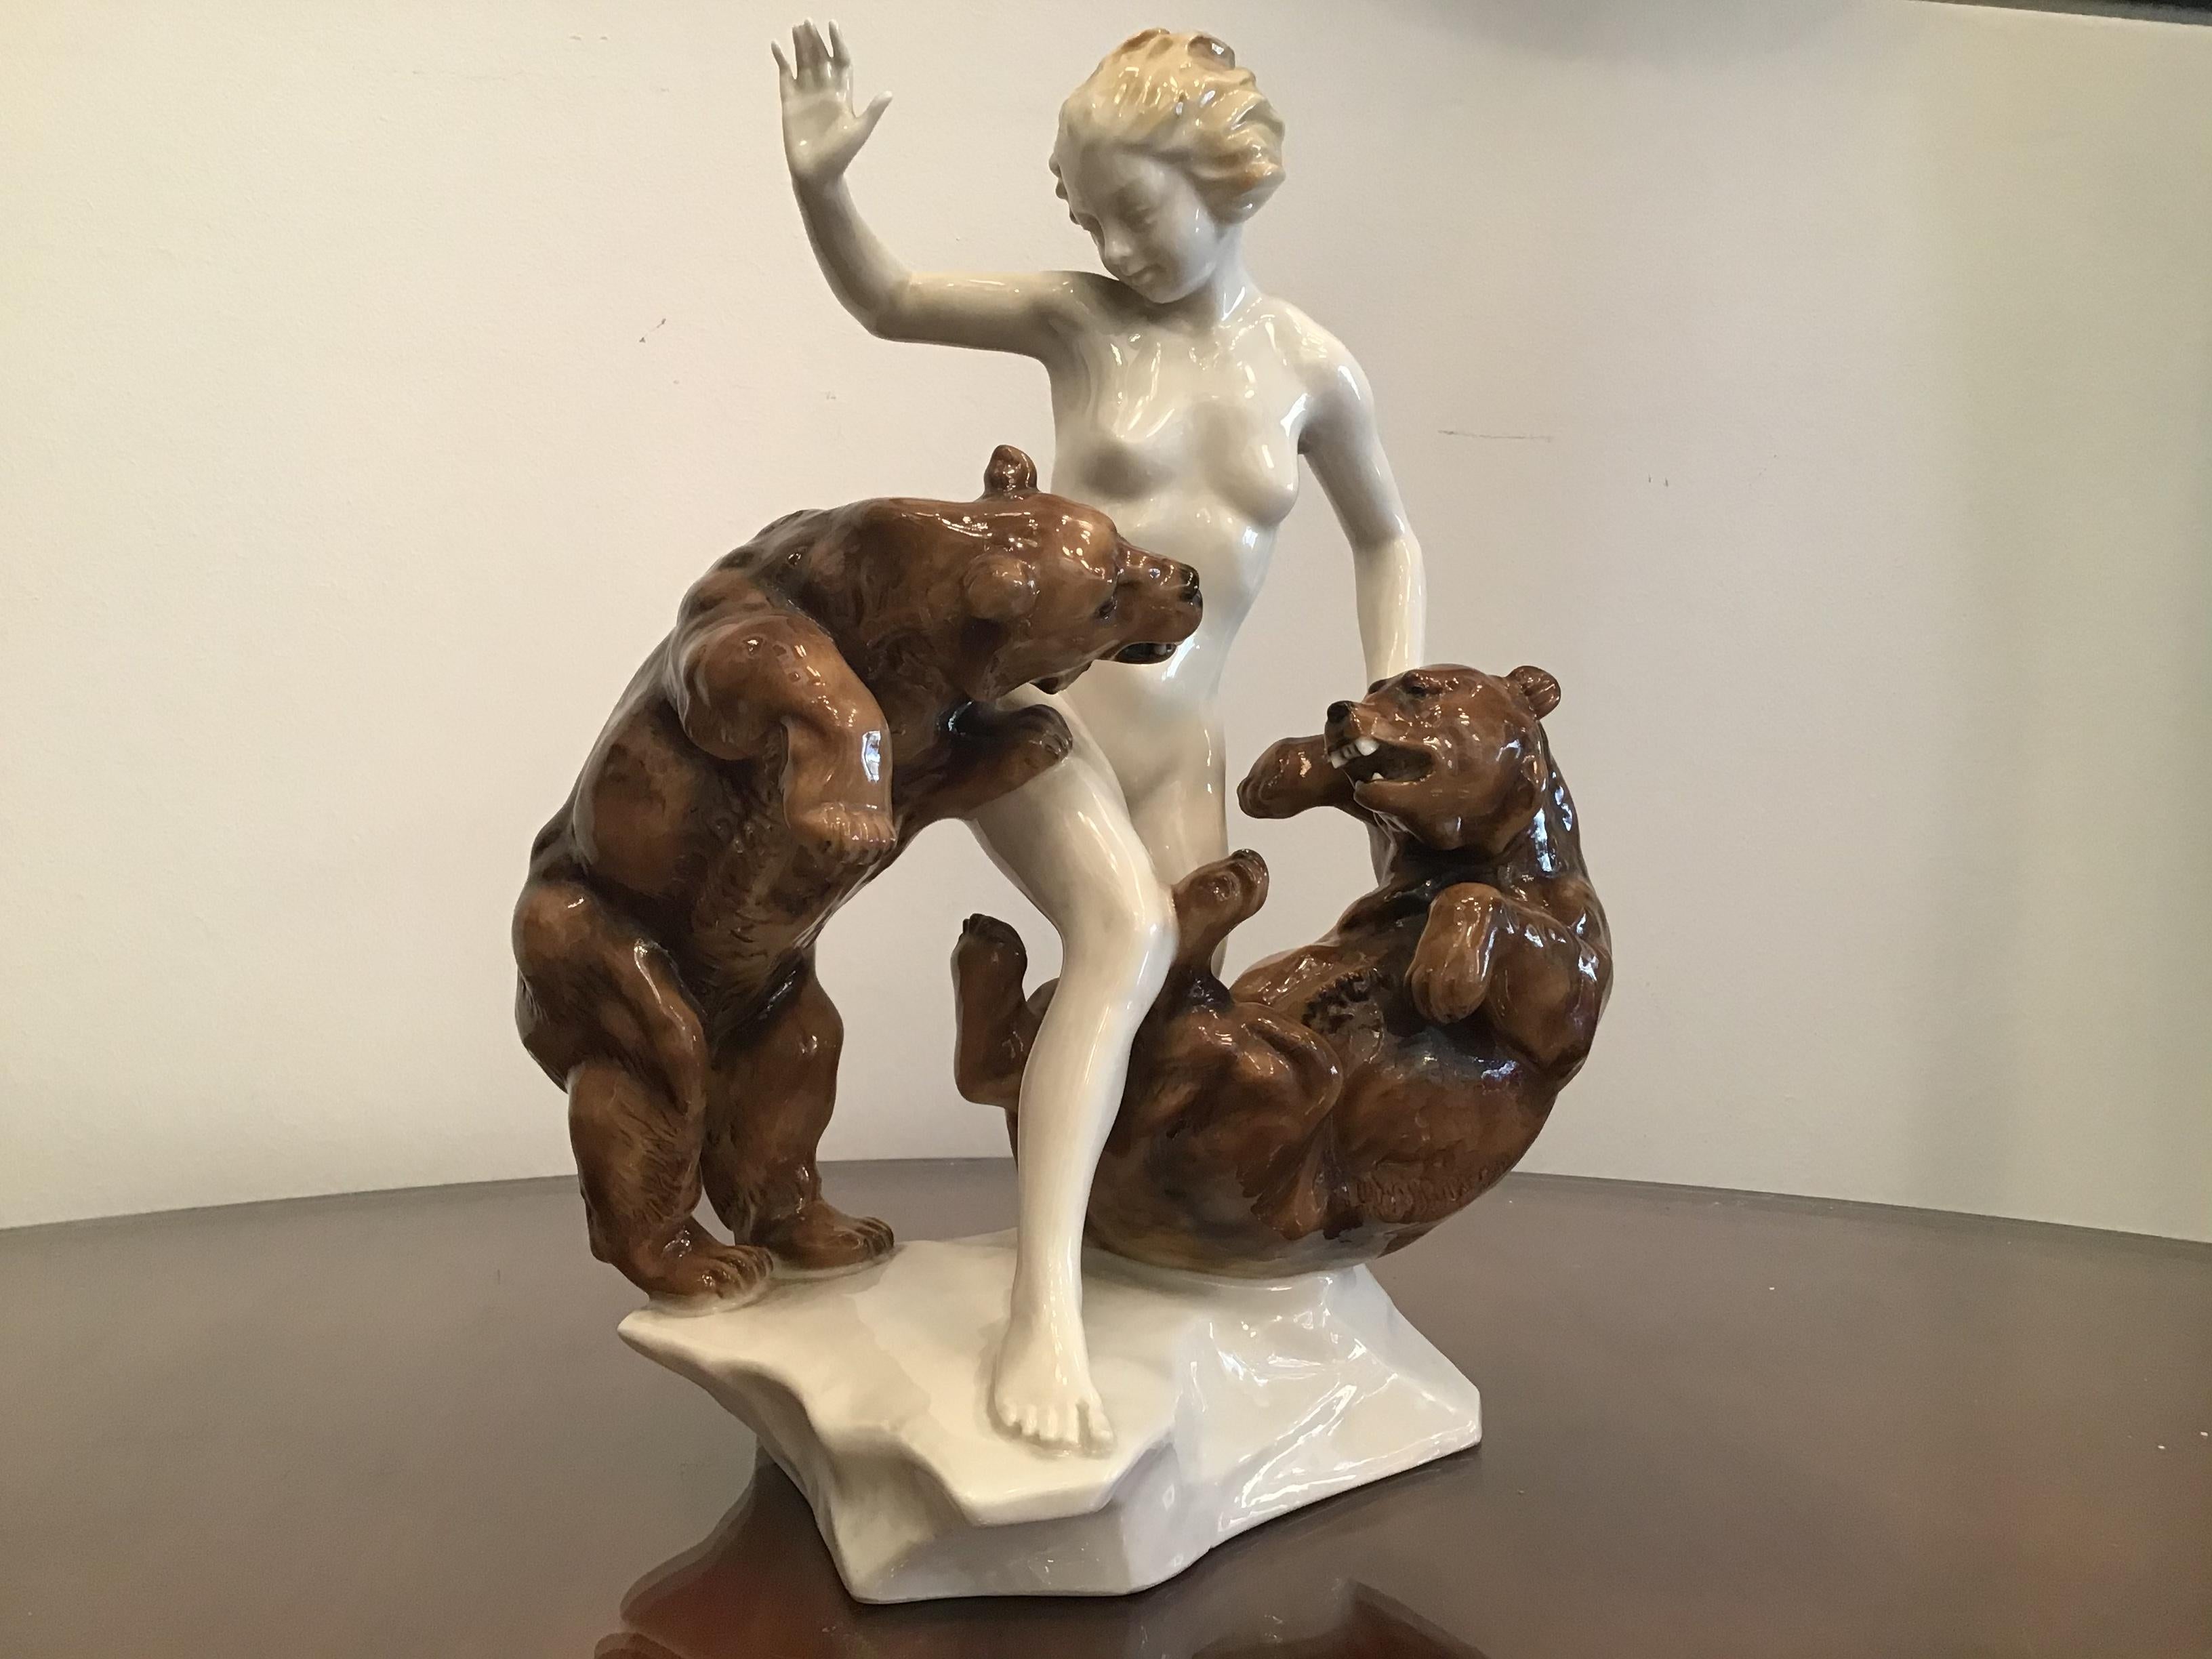 K.Tutter “Woman with Bears” Porcelain, 1940, Germany  For Sale 6